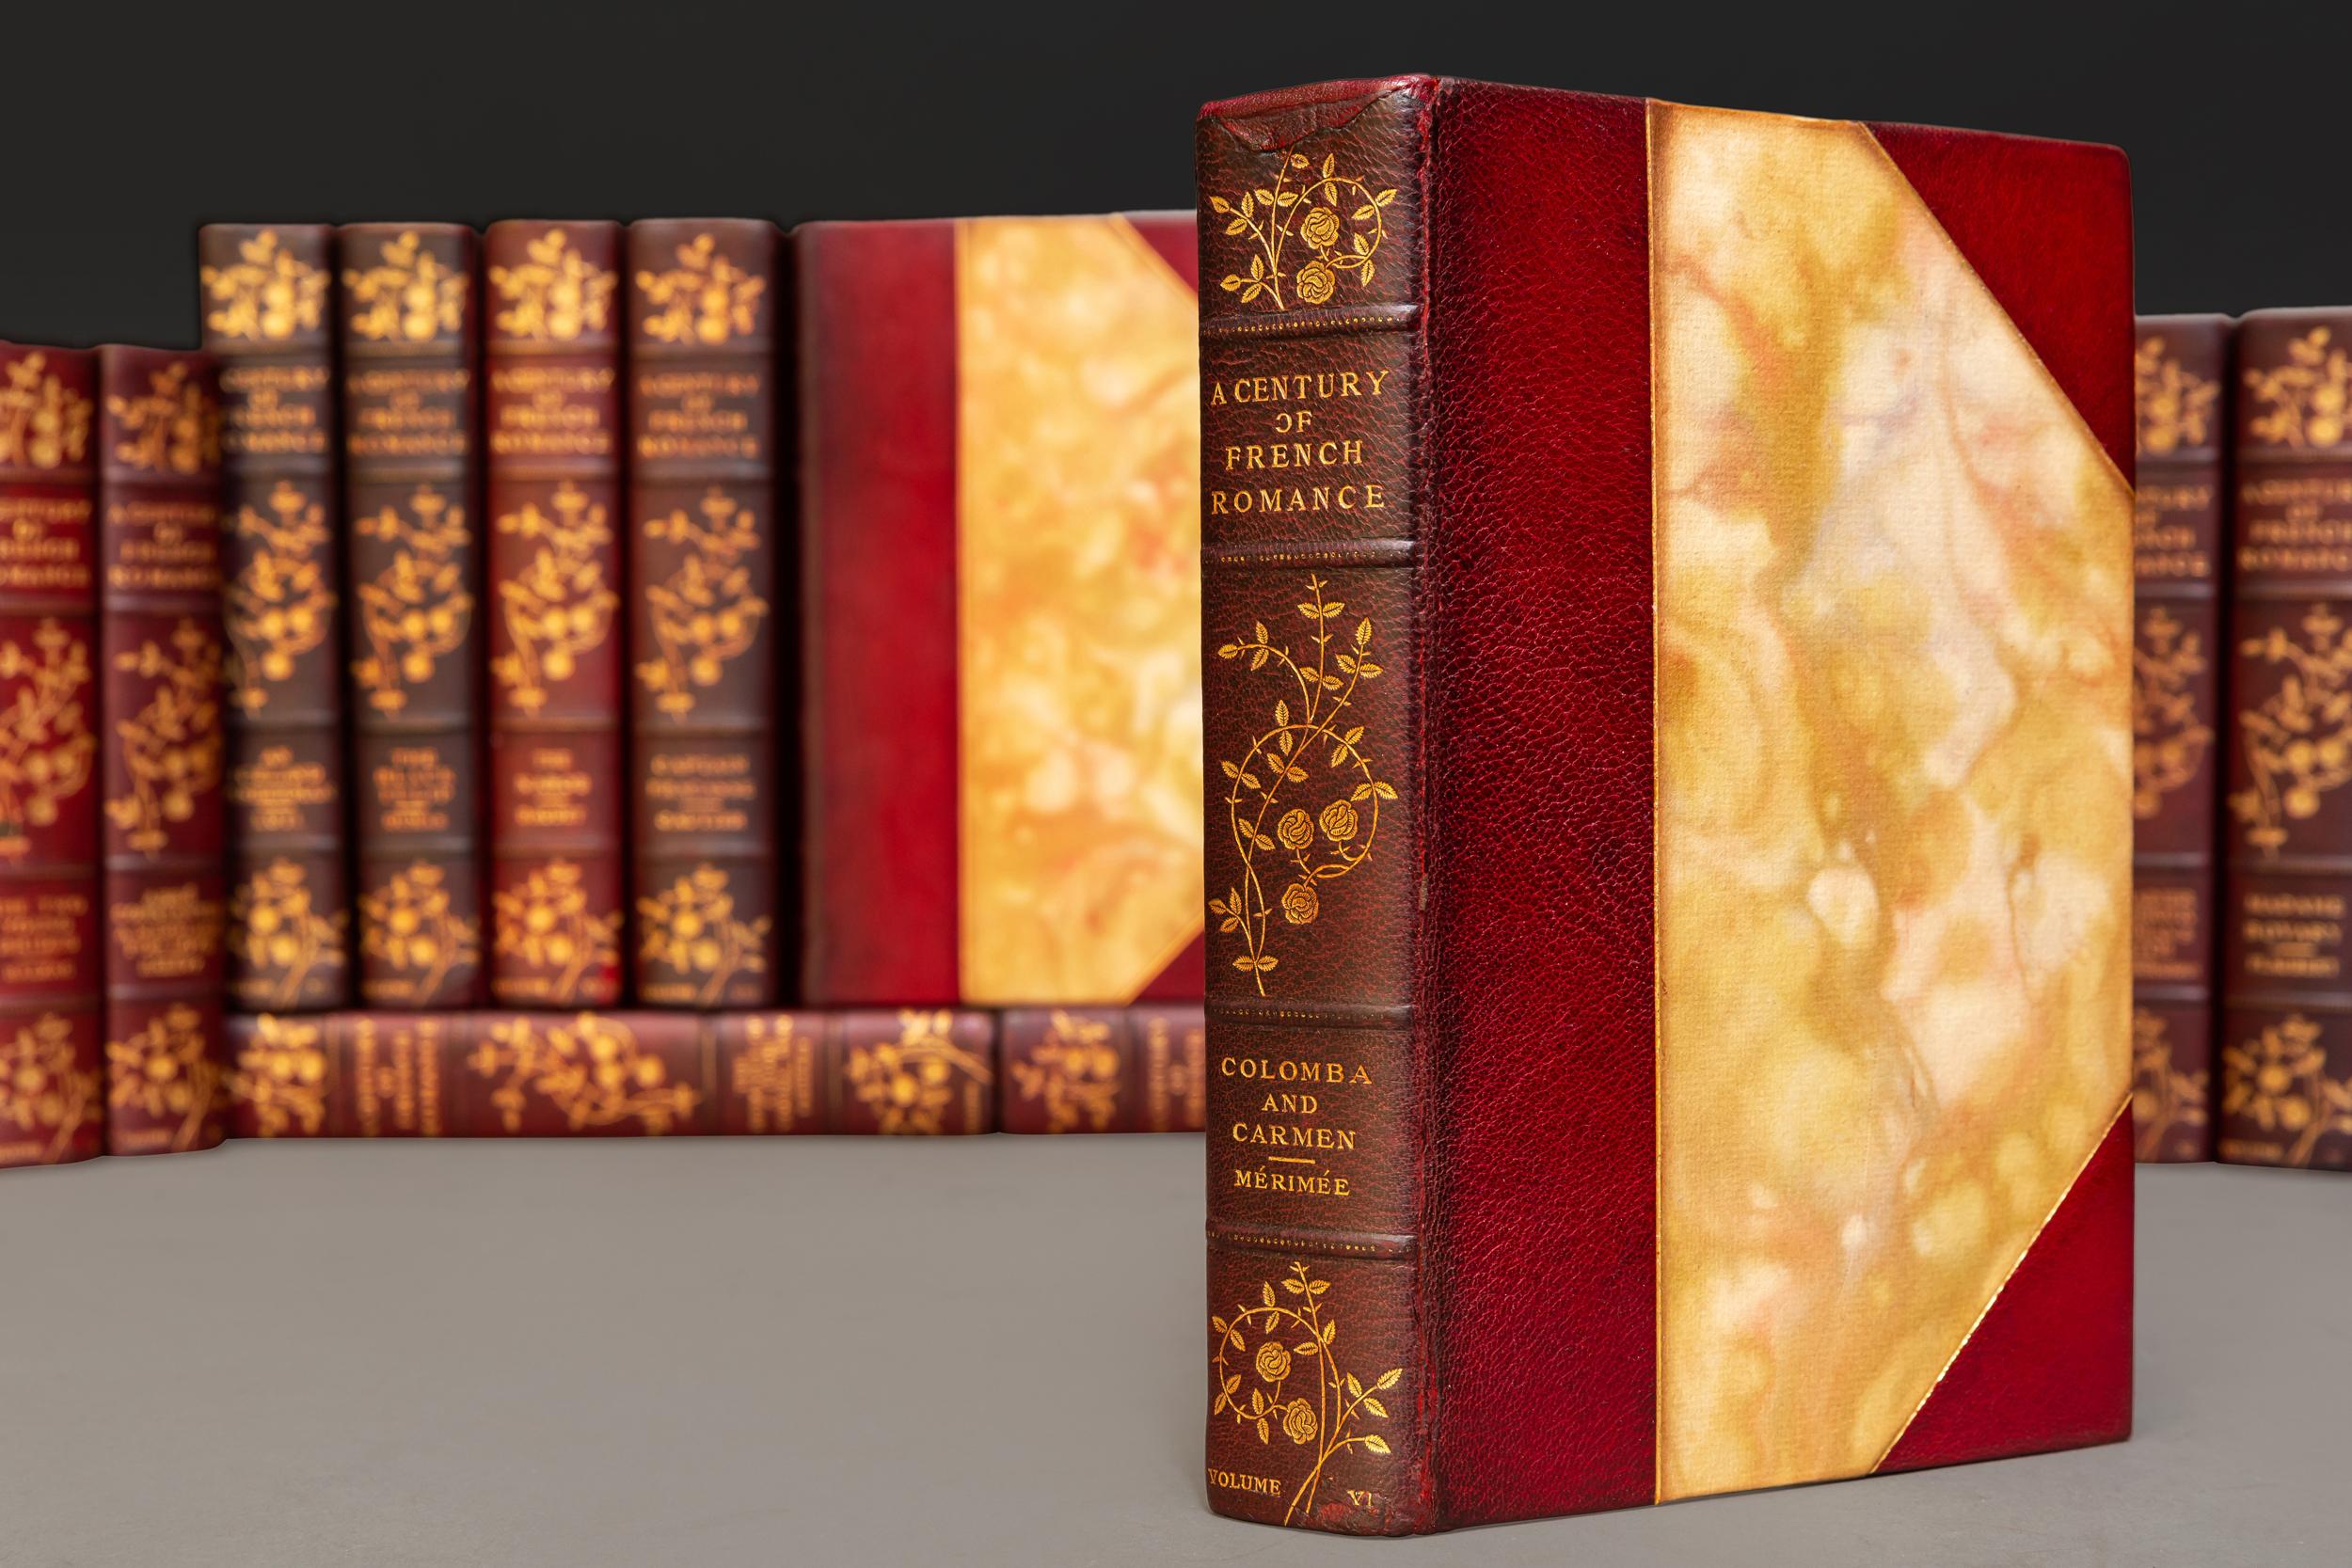 20 Volumes. (Various Authors). A Century of French Romance. Bound in 3/4 red morocco. Marbled boards, marbled endpapers, top edges gilt, raised bands, floral gilt on spines. Illustrated with watercolors, photogravure, portraits by Octave Uzanne.